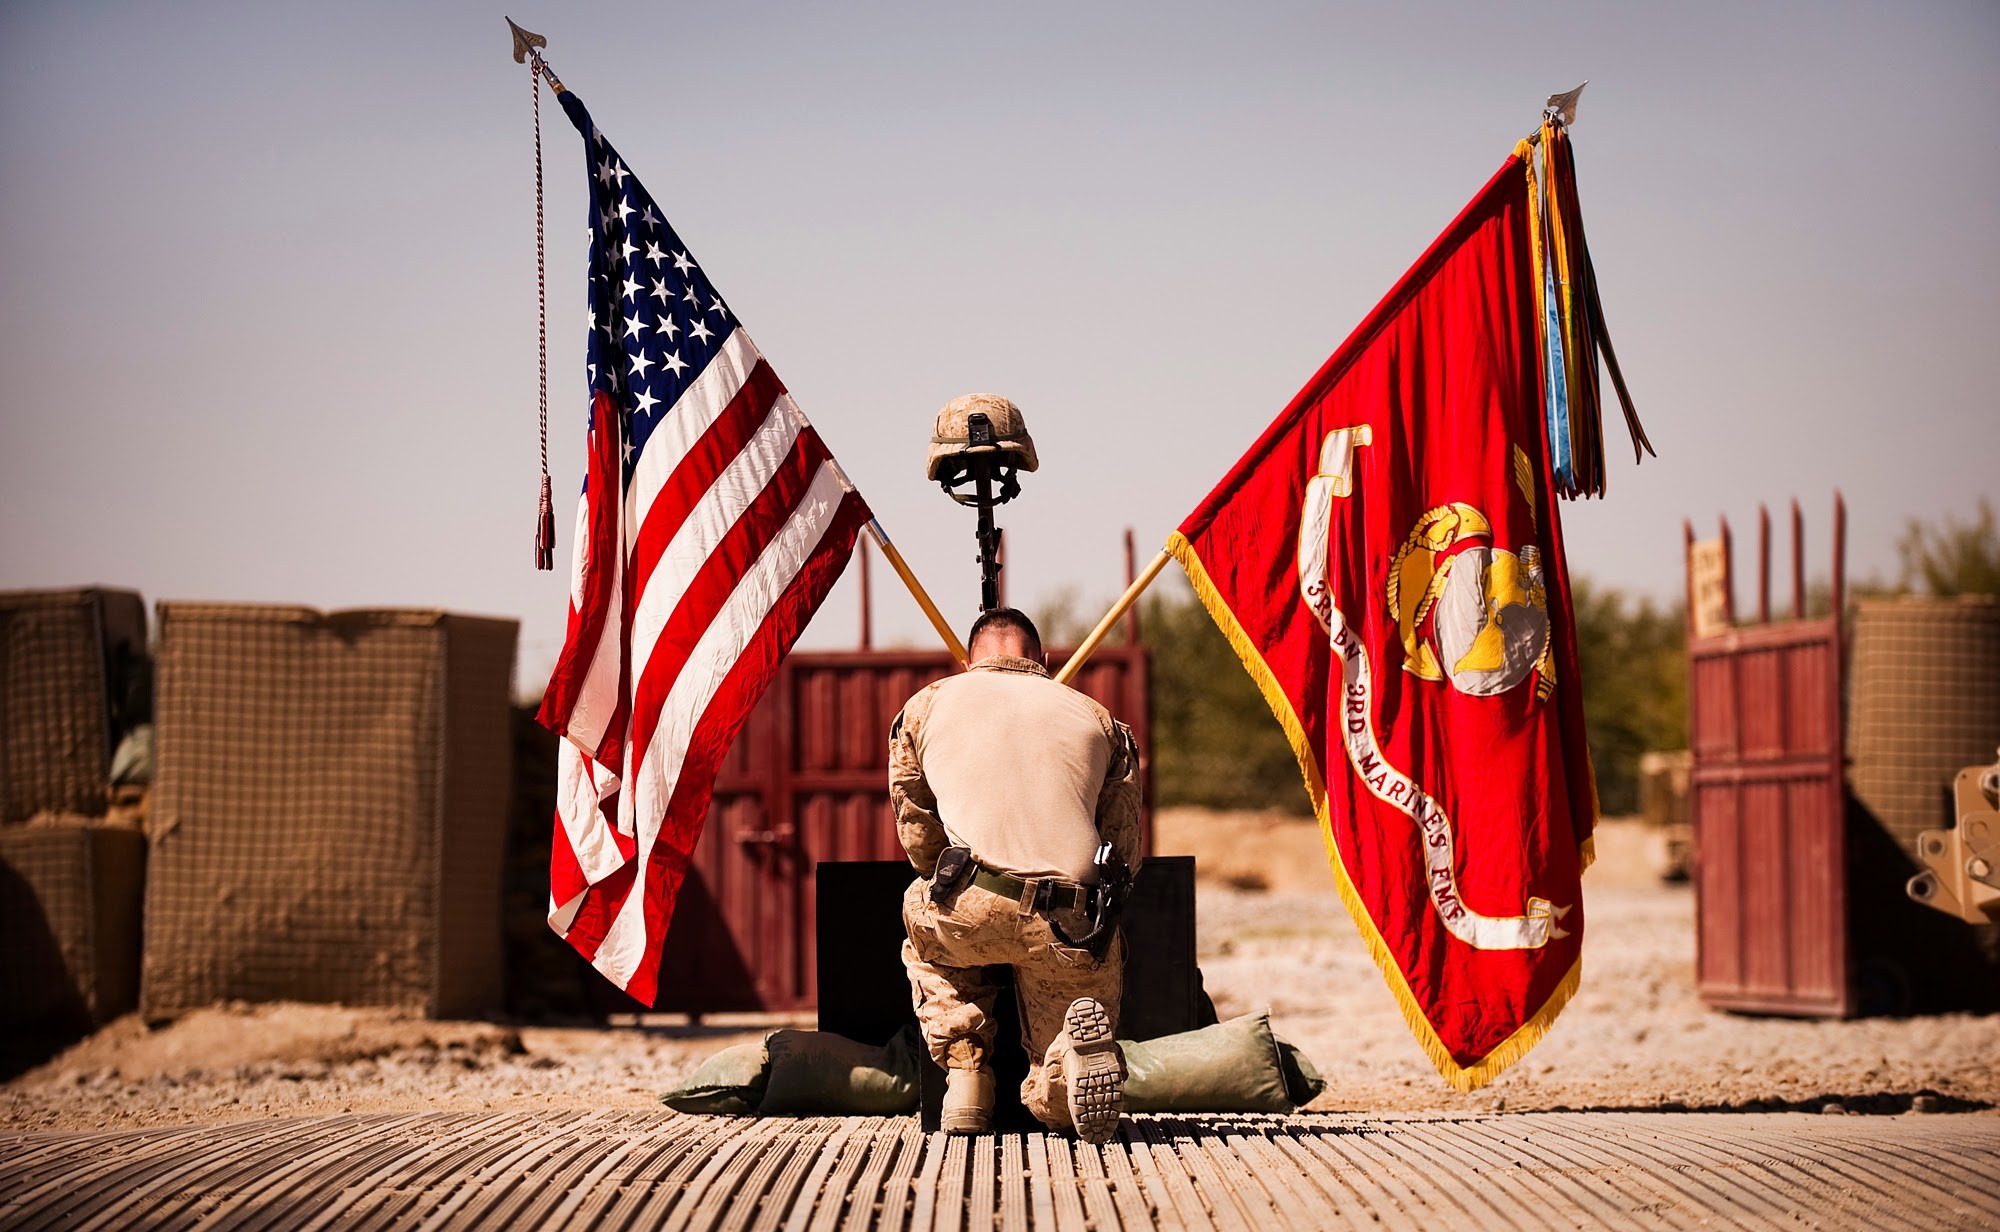 2000x1232 Marines pay respects to fallen brothers – A Marine says goodbye to 1st Lt.  Scott J. Fleming during his memorial service at Patrol Base Jaker,  Afghanistan, ...